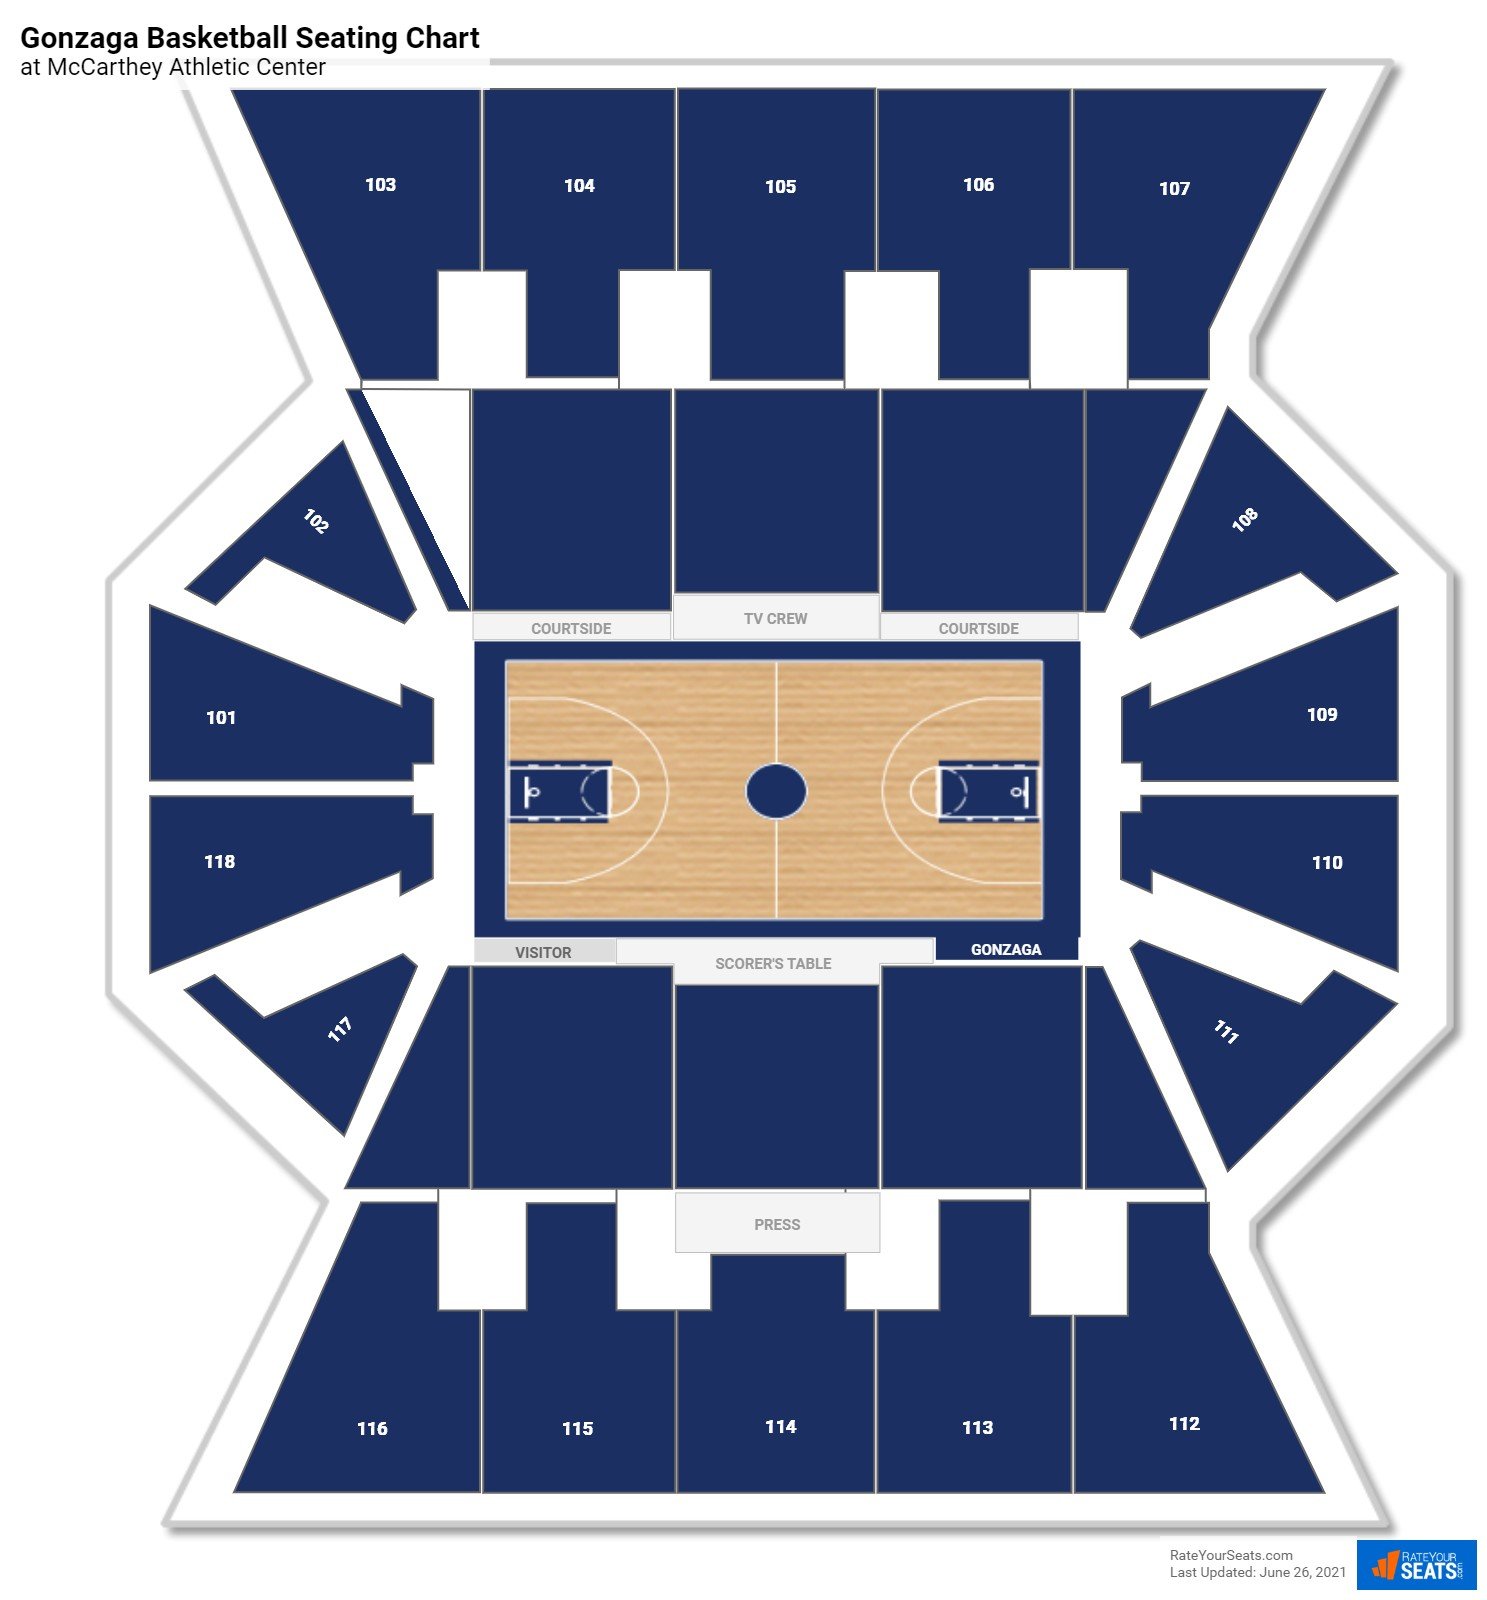 McCarthey Athletic Center Seating Chart - RateYourSeats.com